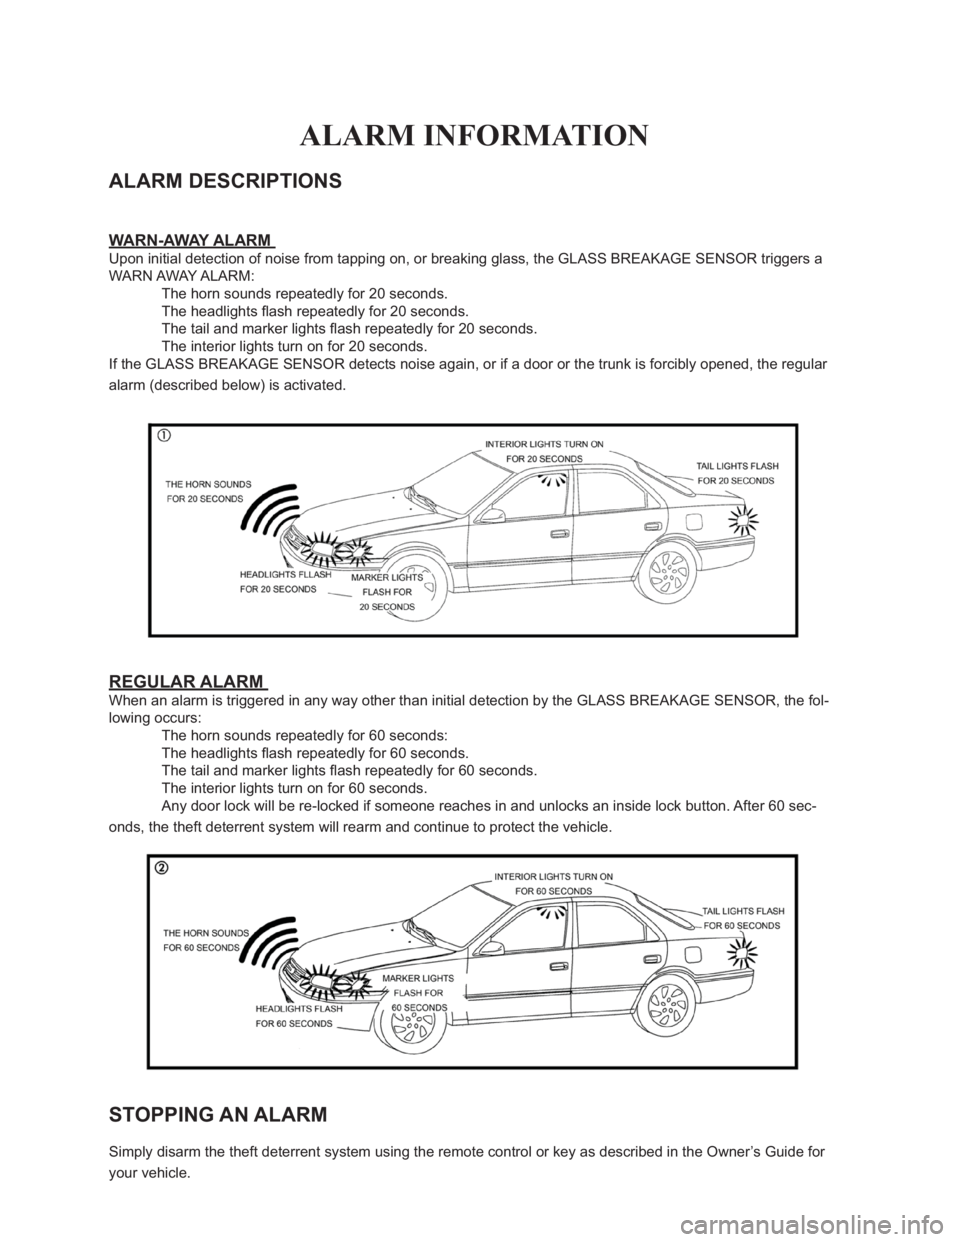 TOYOTA SOLARA 2005  Accessories, Audio & Navigation (in English) 
ALARM INFORMATION
ALARM DESCRIPTIONS 
WARN-AWAY ALARM 
Upon initial detection of noise from tapping on, or breaking glass, the GLASS BREAKAGE SENSOR triggers a 
WARN AWAY ALARM: 
� �7�K�H��K�R�U�Q�